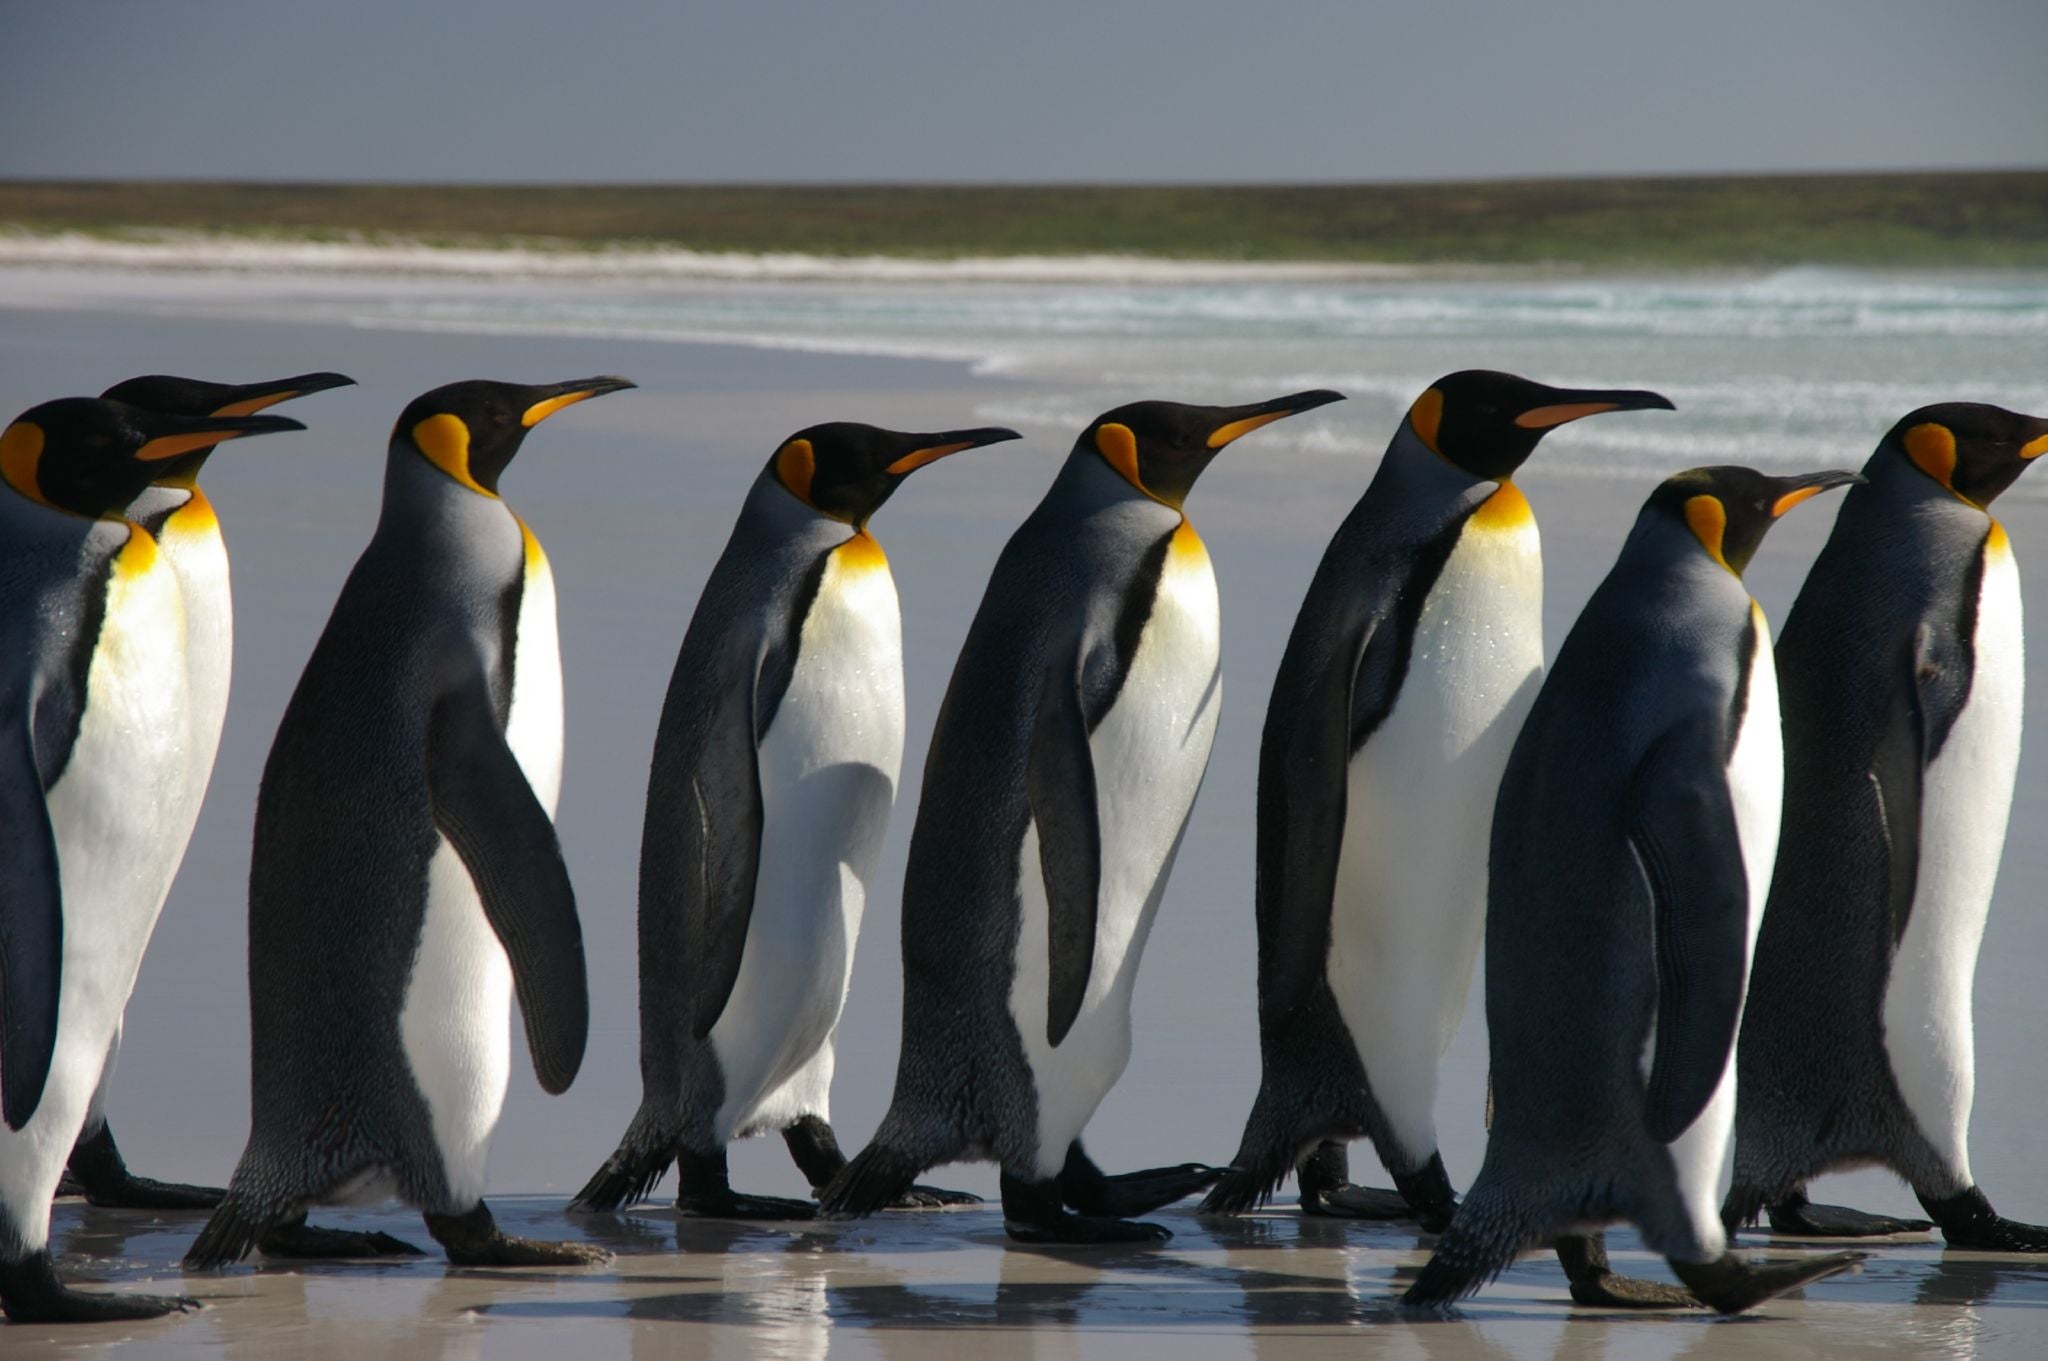 Smart cars and penguins: more alike than you'd think